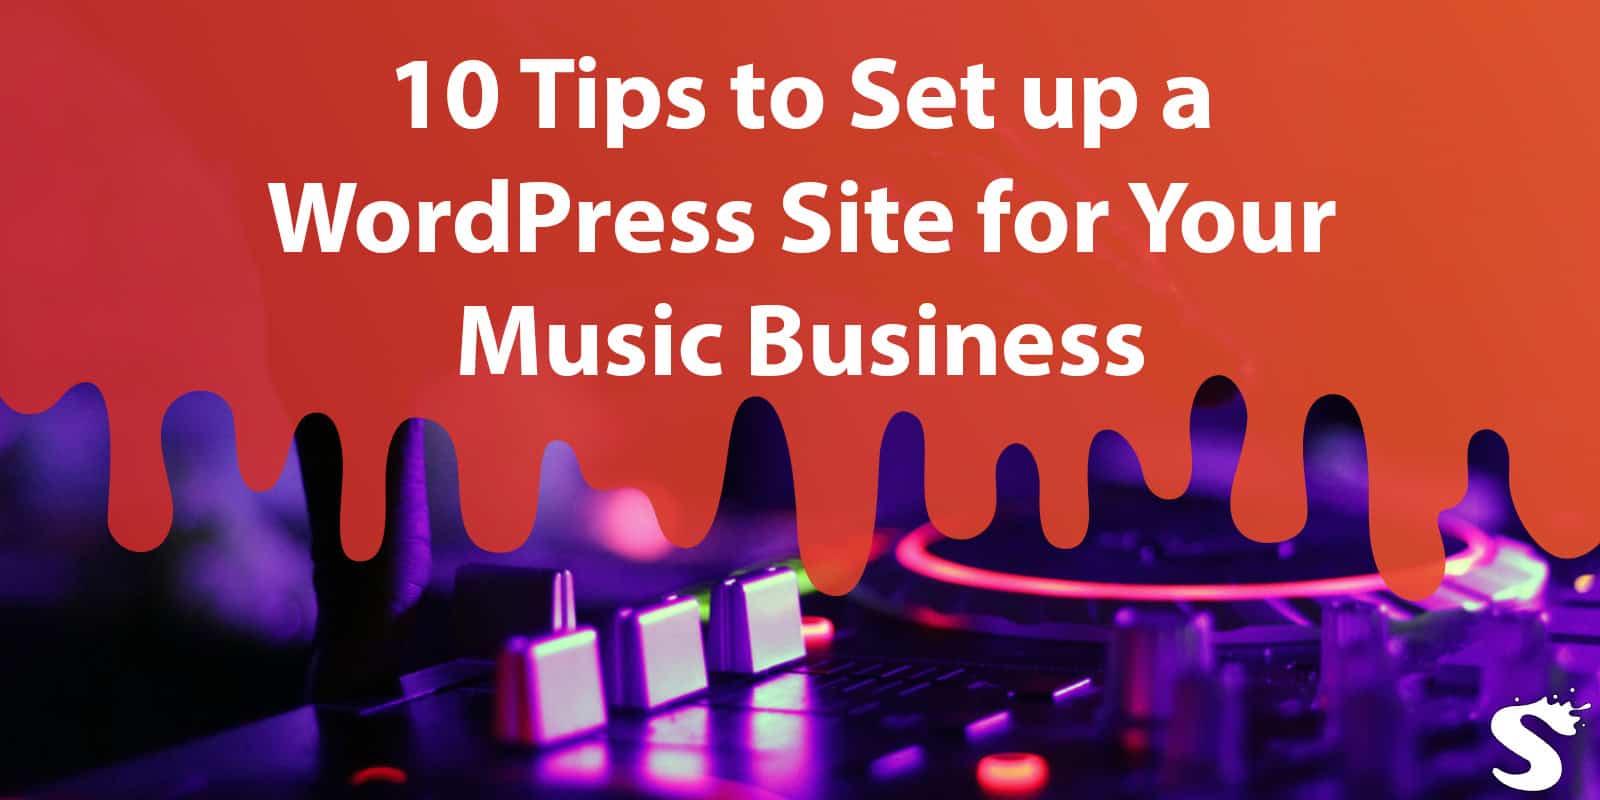 10 Tips to Set up a WordPress Site for Your Music Business